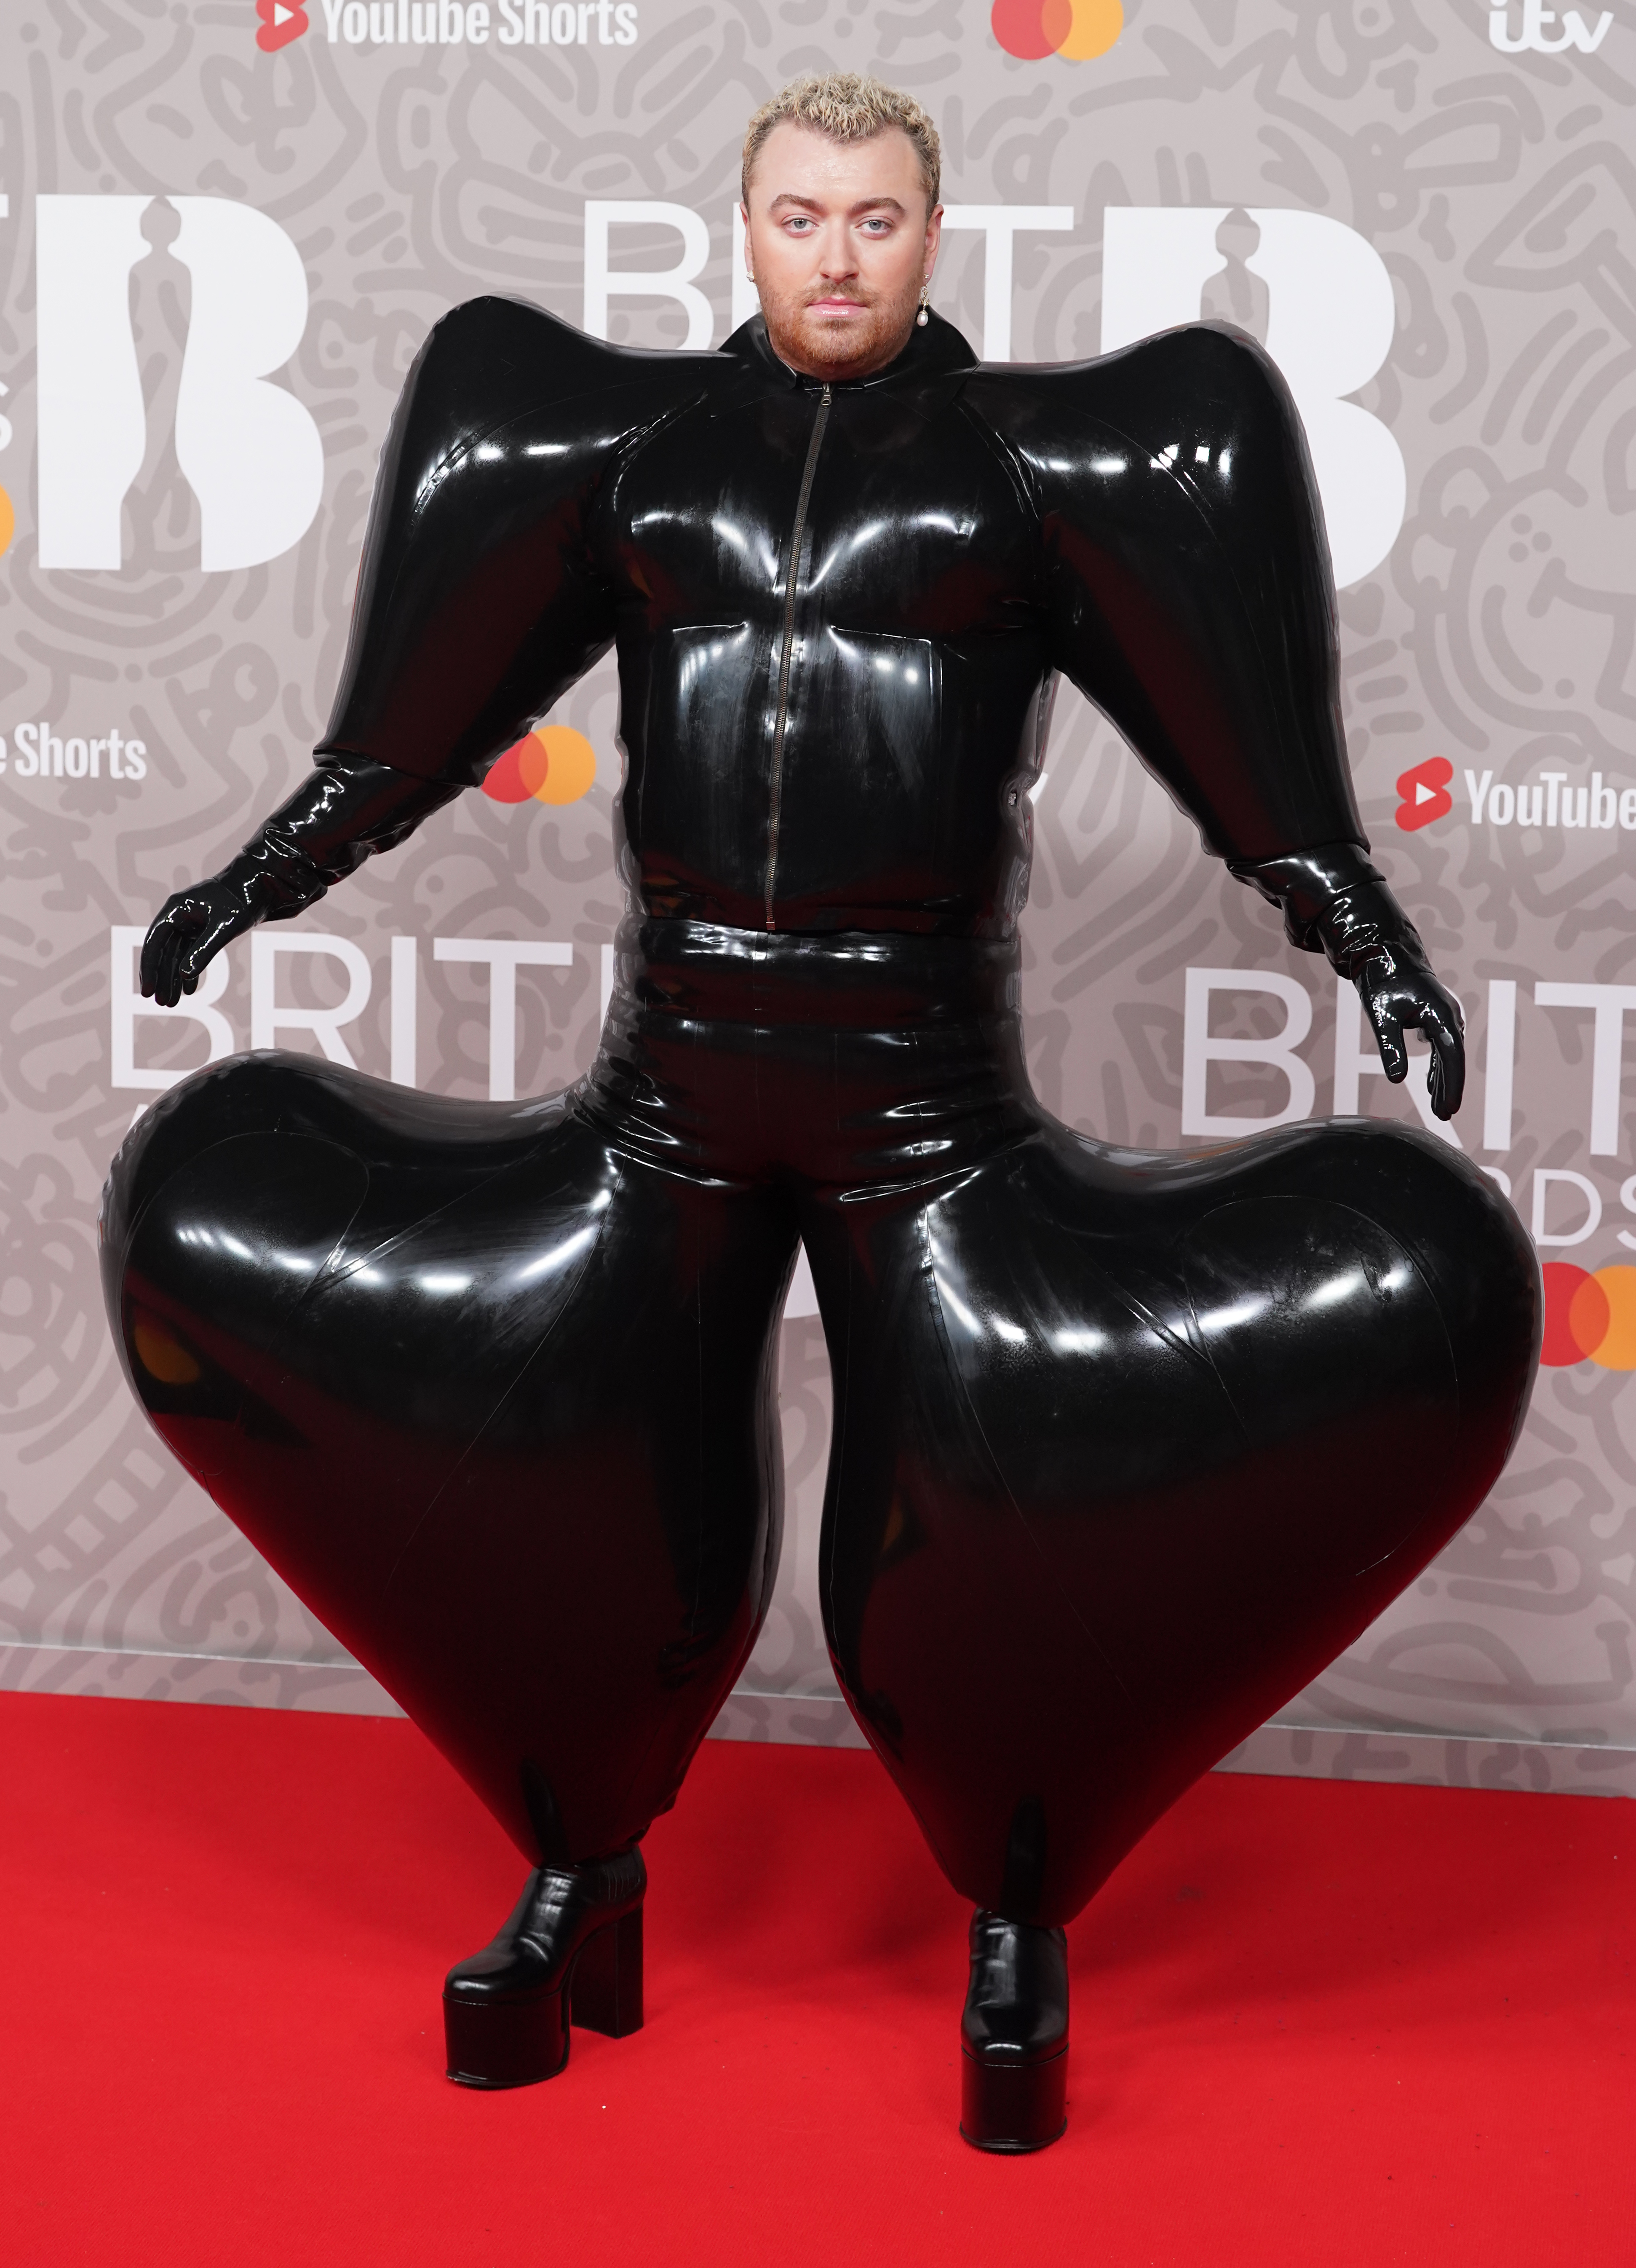 Sam Smith's extravagant latex outfit at the Brit Awards